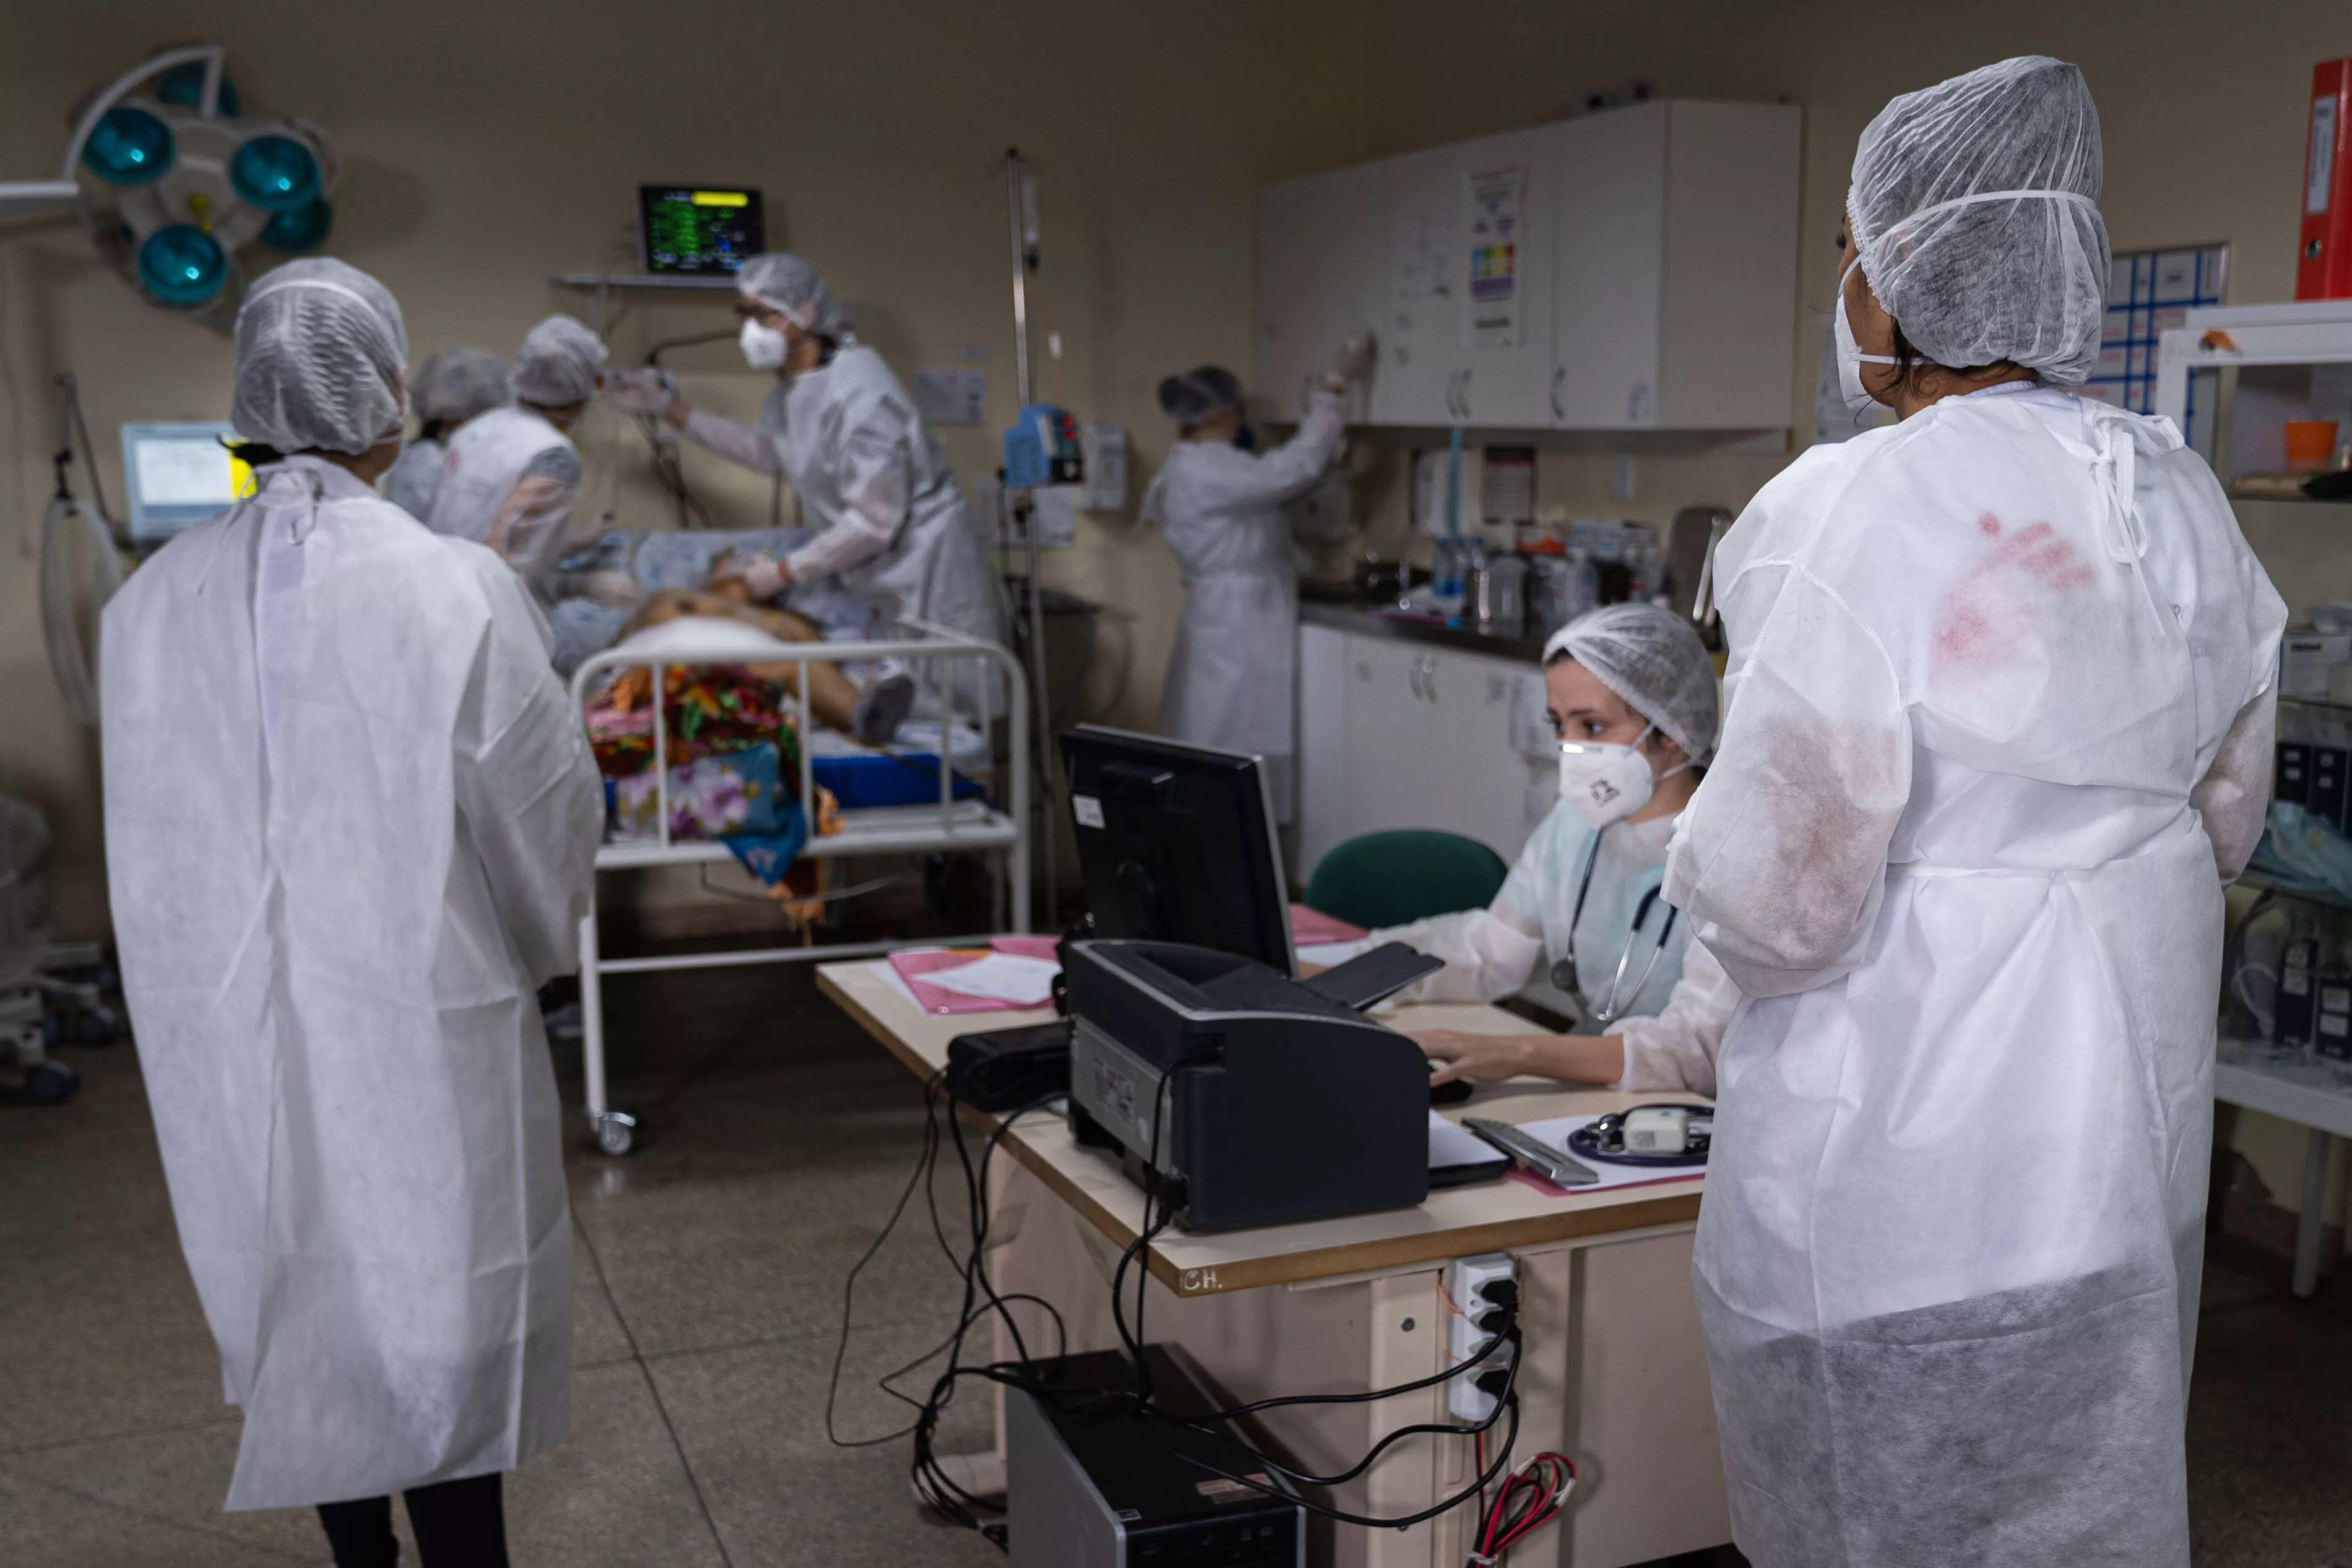 With a steep increase in the number of cases and deaths caused by COVID-19, the health care system in Manaus, the capital of the state of Amazonas, collapsed for the second time in January 2021. MSF supports 28 de Agosto and José Rodrigues Emergency Unit - depicted in these photos - with doctors, nurses and mental health care.